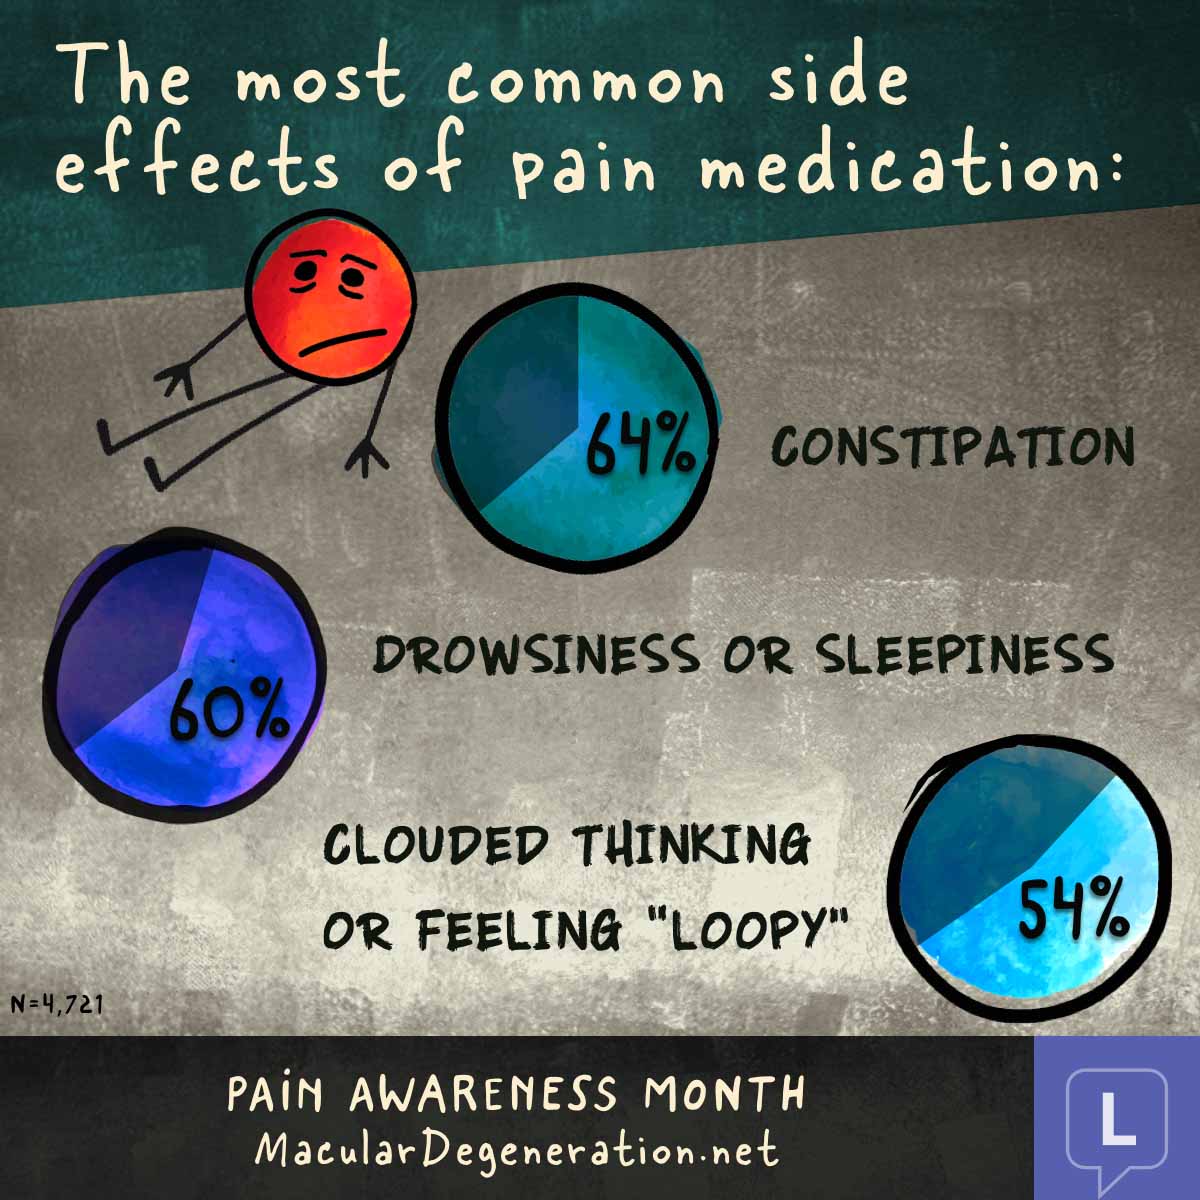 Common side effects of pain medication are constipation, drowsiness, and clouded thinking